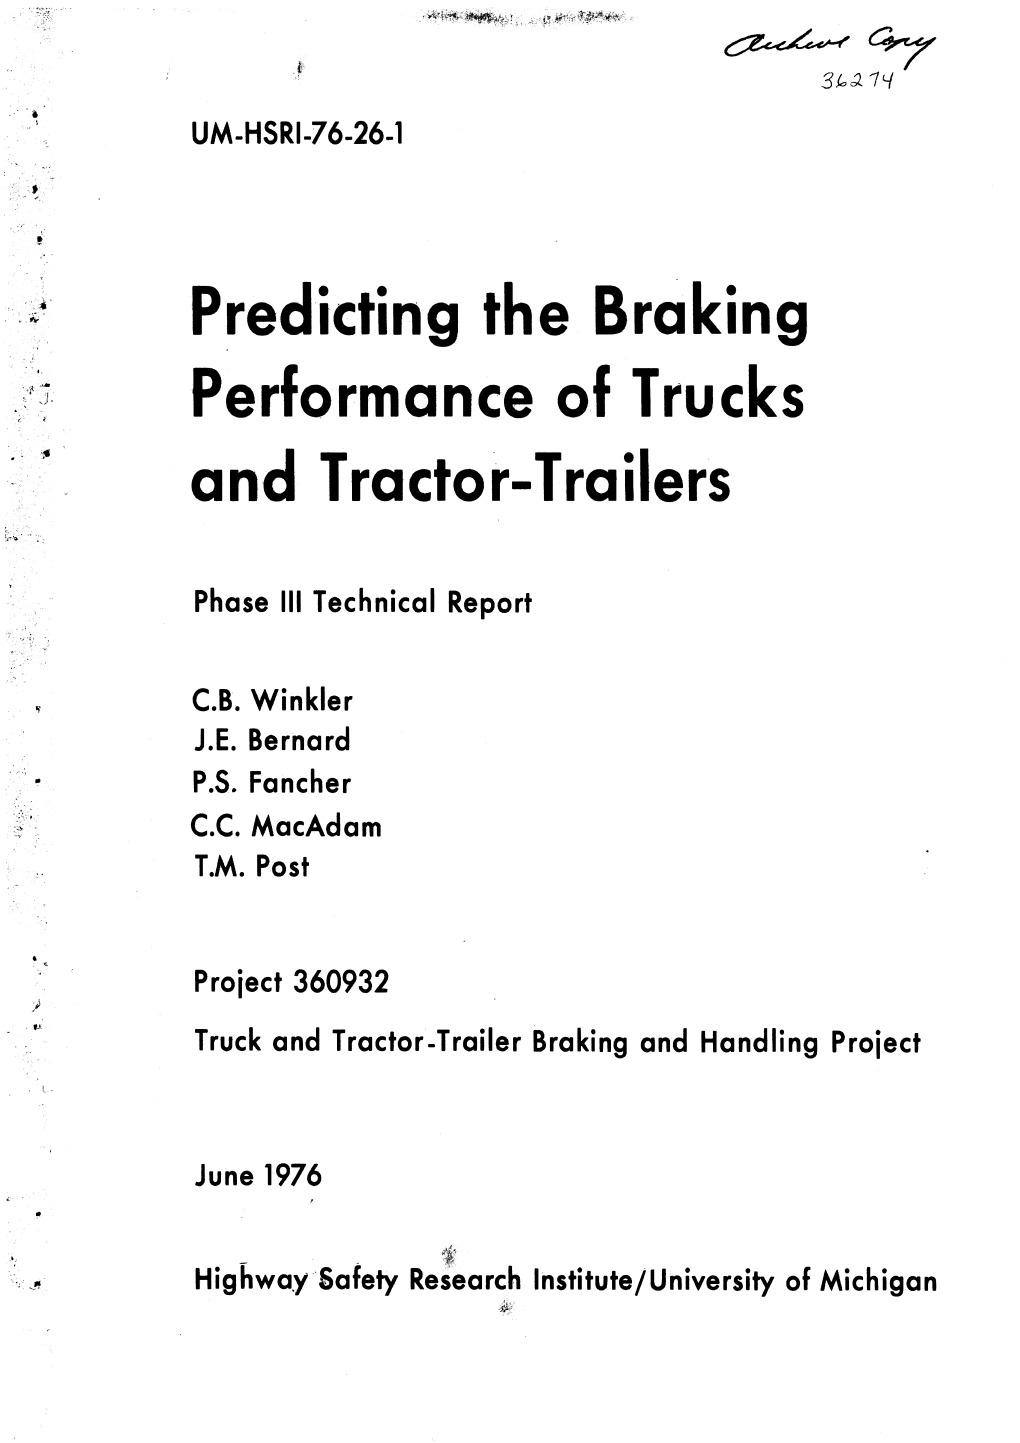 Predicting the Bra King Performance of Trucks and Tractor-Trailers